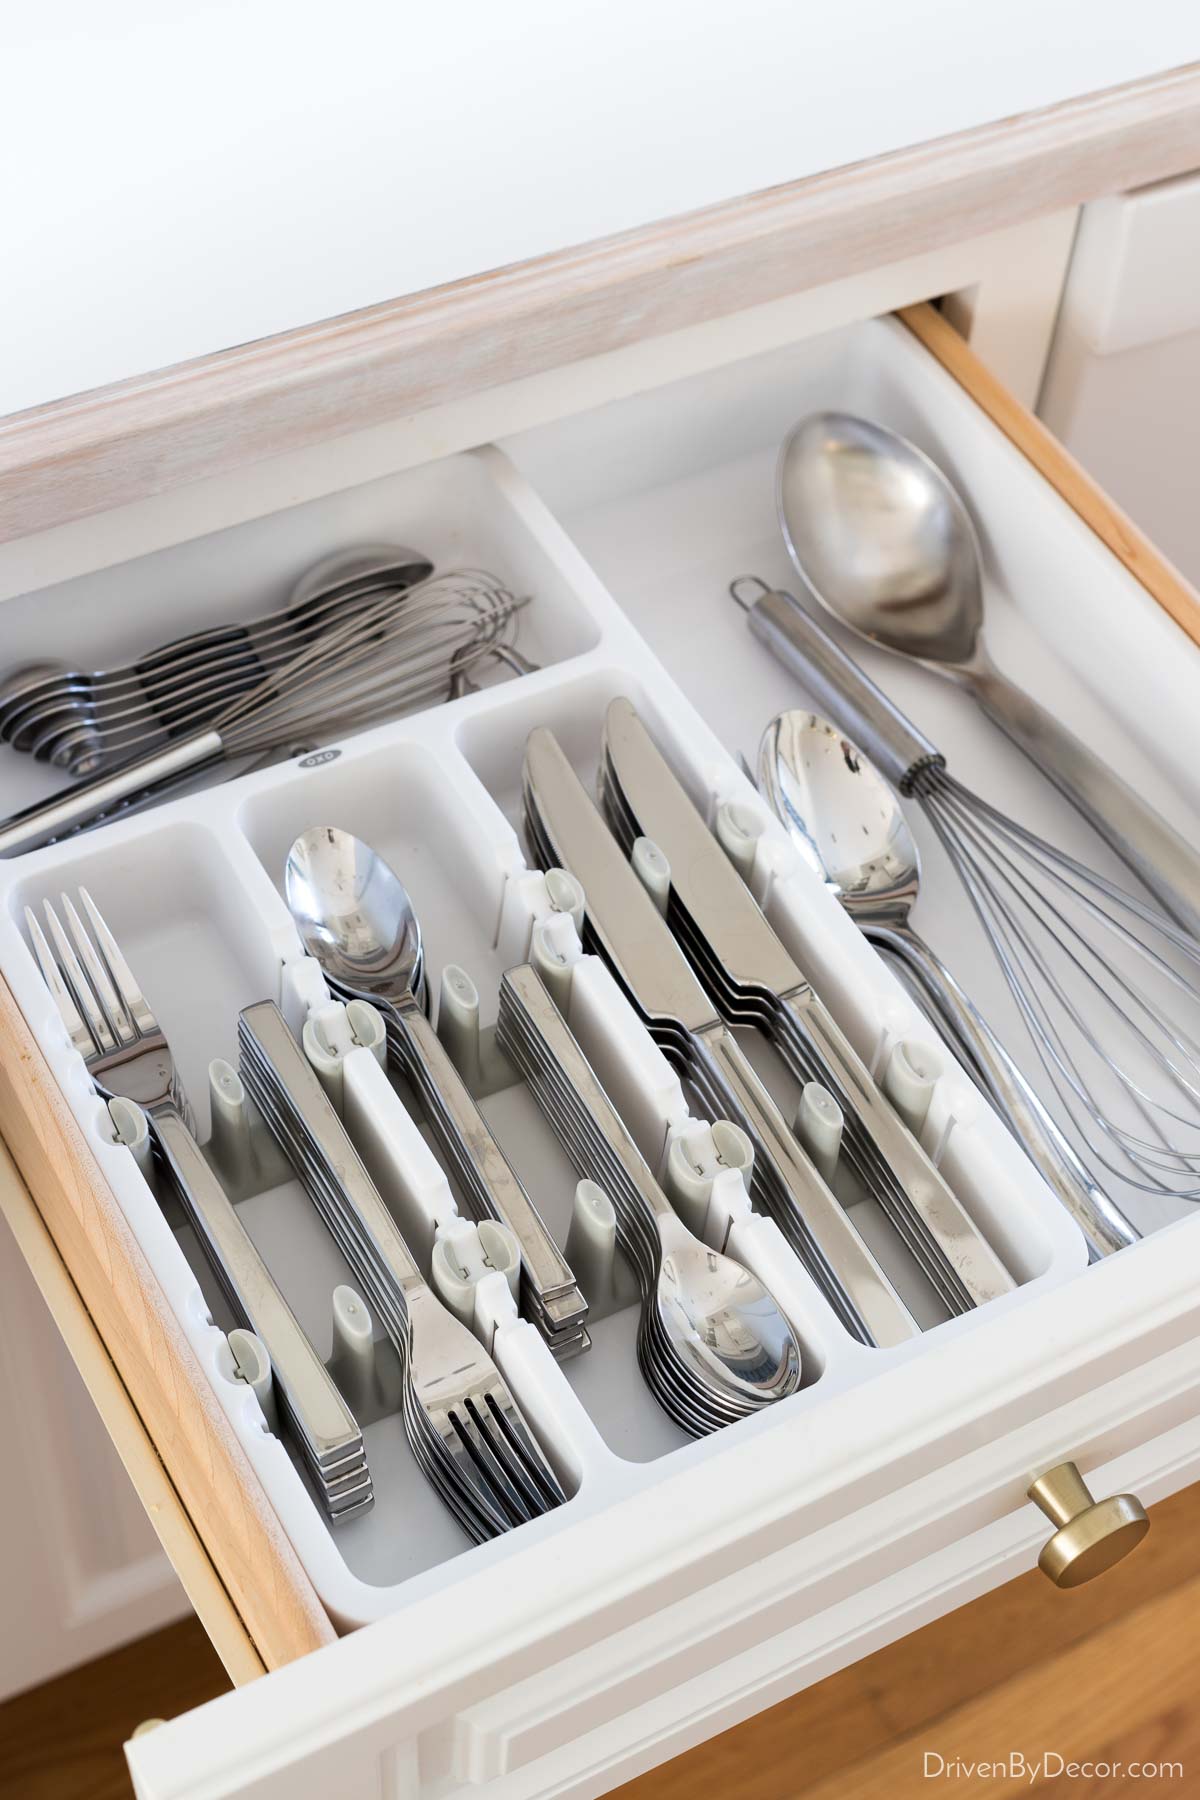 This expandable kitchen drawer organizer is perfect for keeping silverware and cutlery